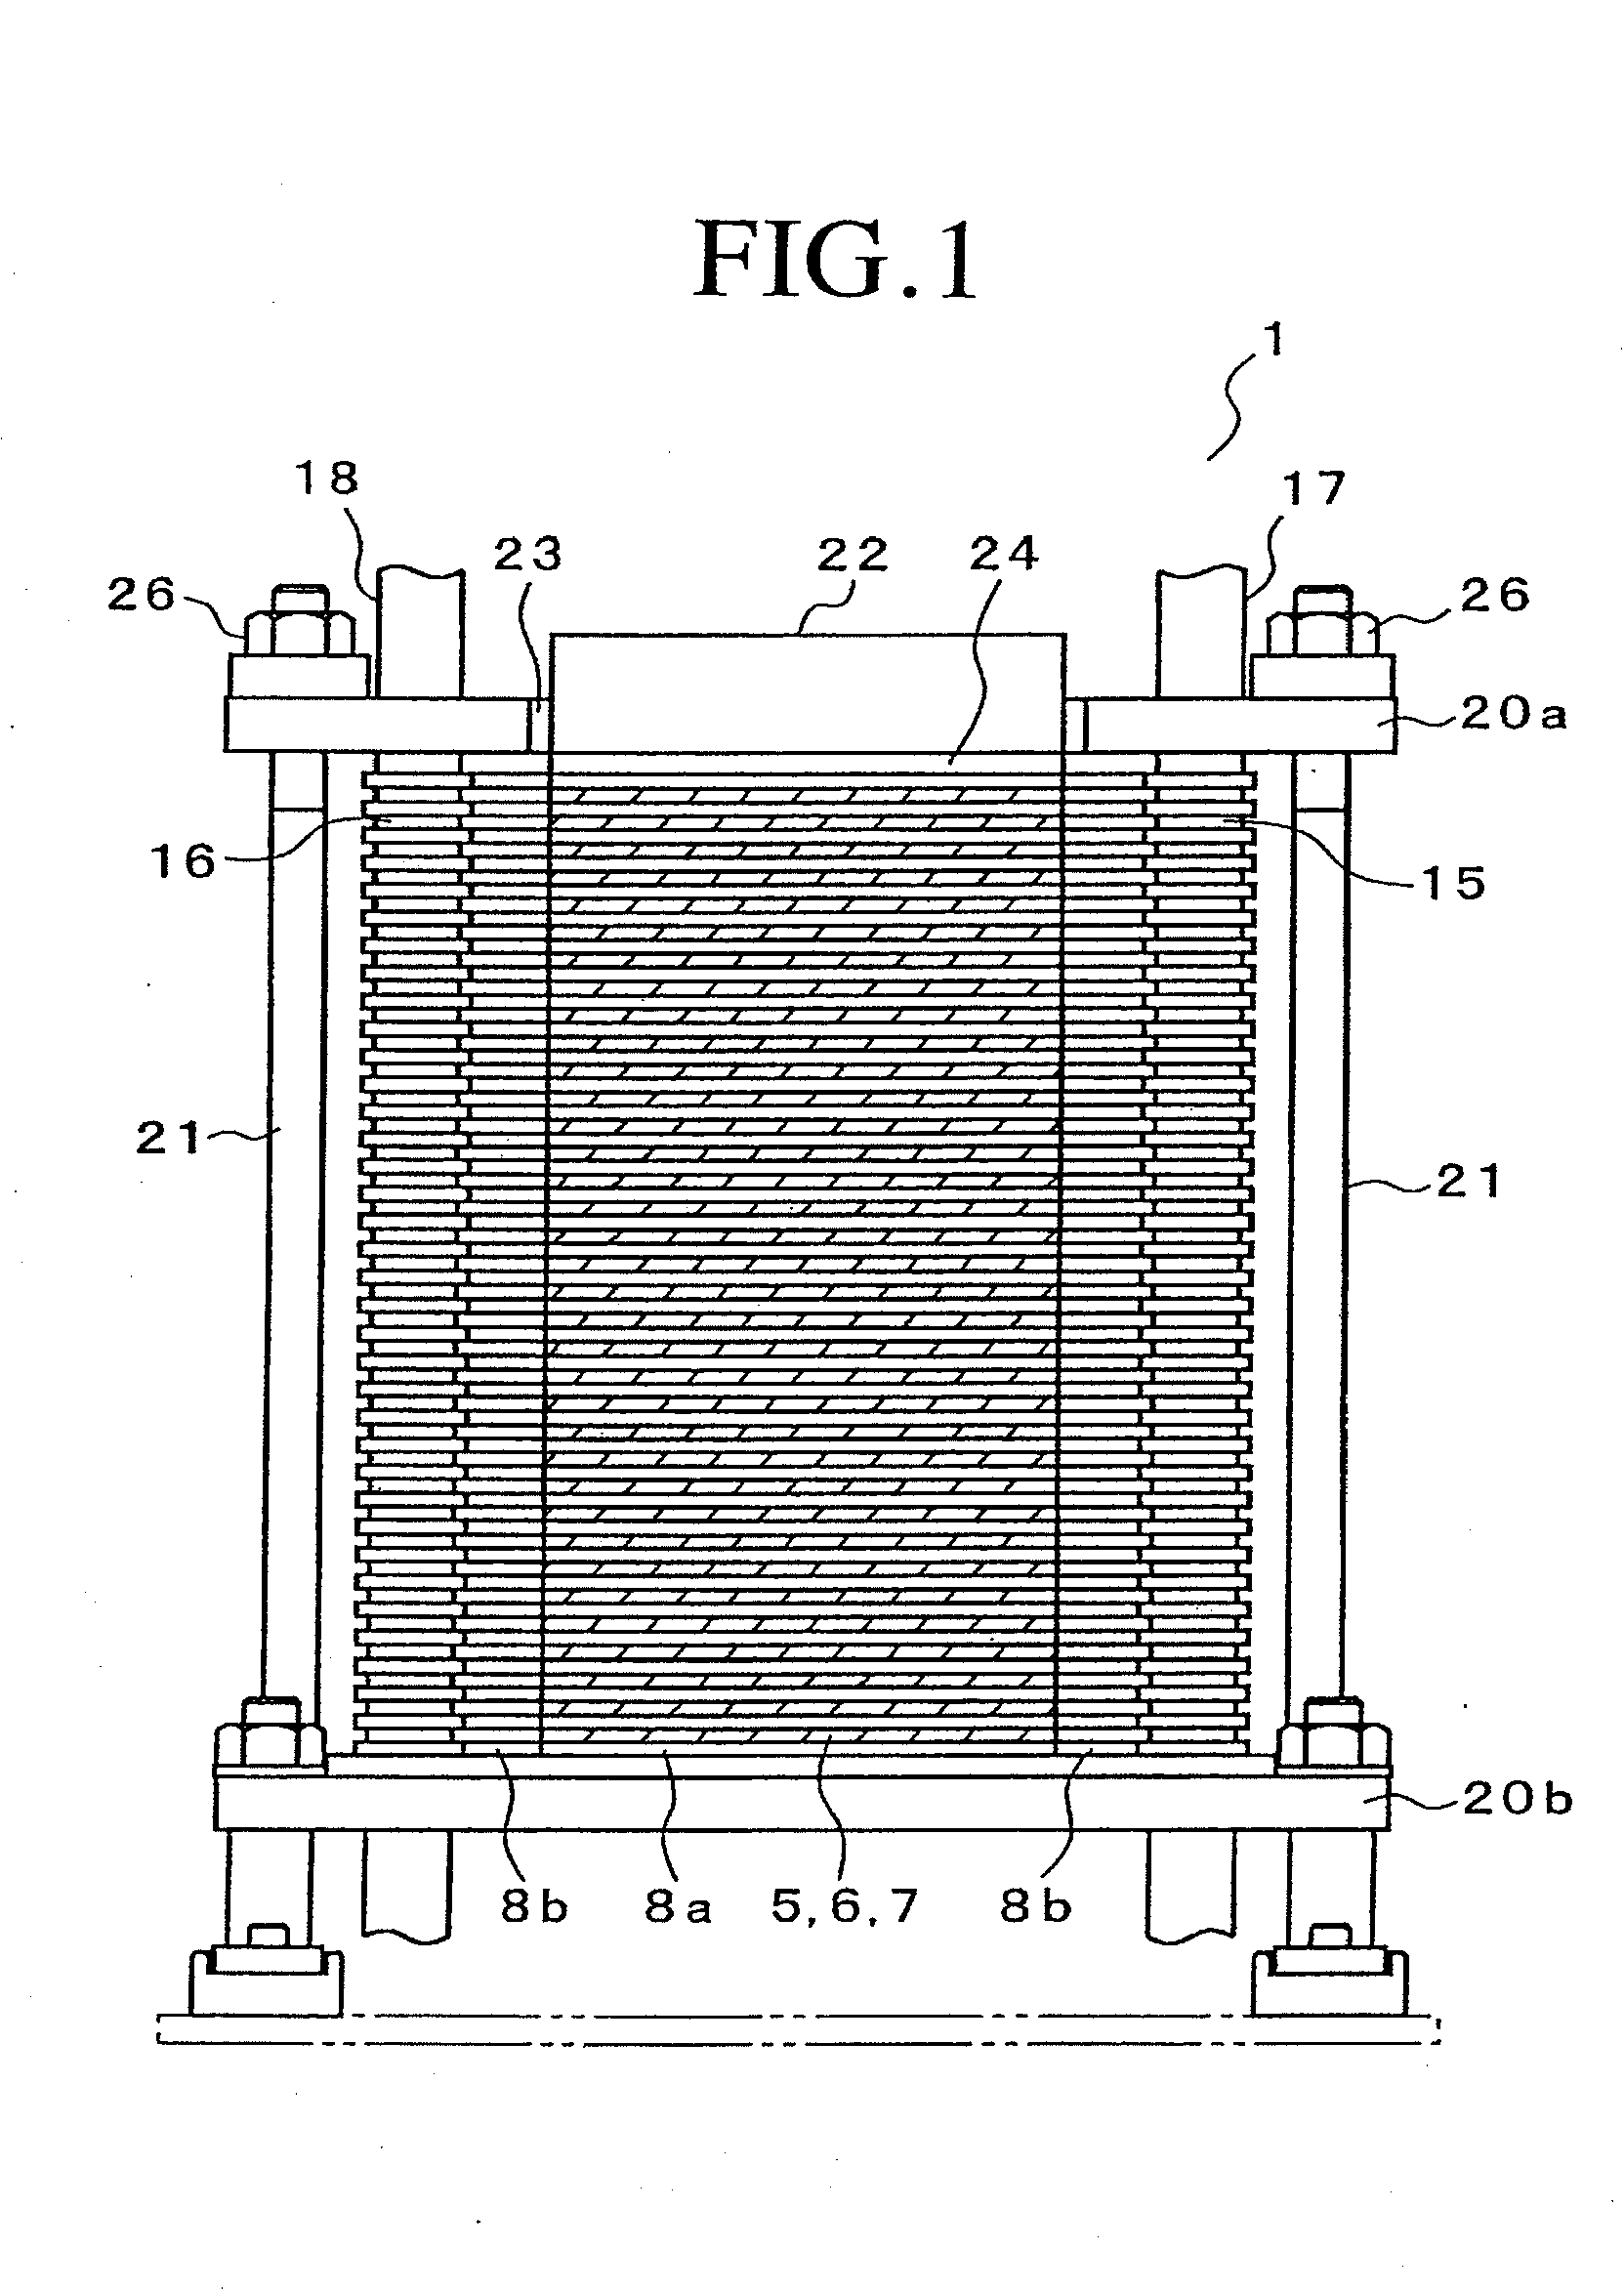 Plate-laminated type fuel cell